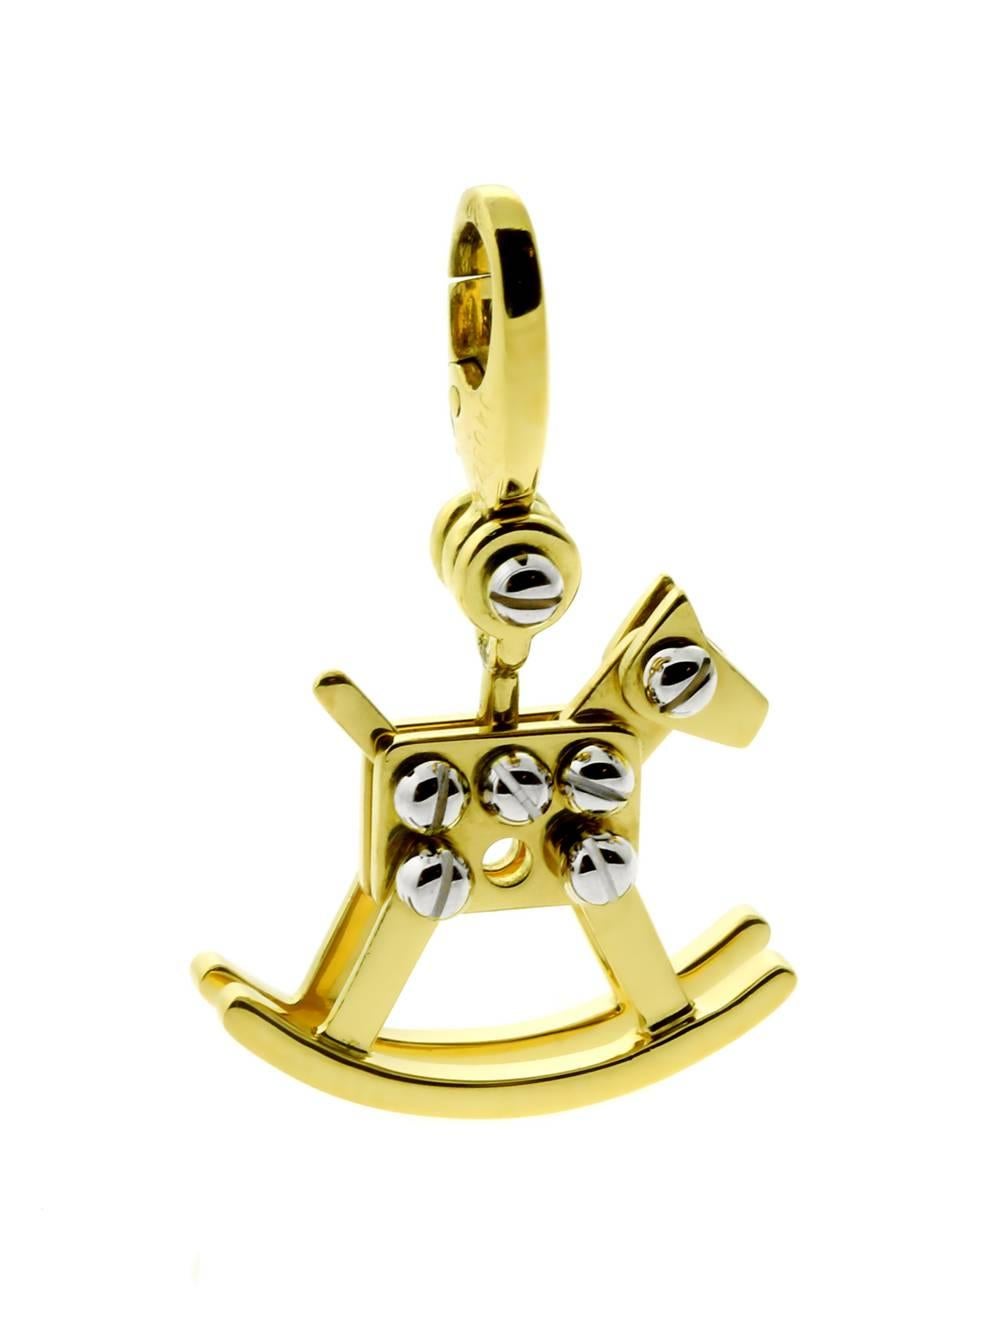 Cartier Rocking Horse Charm Pendant in 18k White & Yellow Gold

Hallmarks: Cartier, 2000, 750, Serial Number
Weight: 5.9 Grams
Dimensions: 18mm Wide (.70″ Inches) by 29mm in Length (1.14″ Inches)

Inventory ID: 0000116